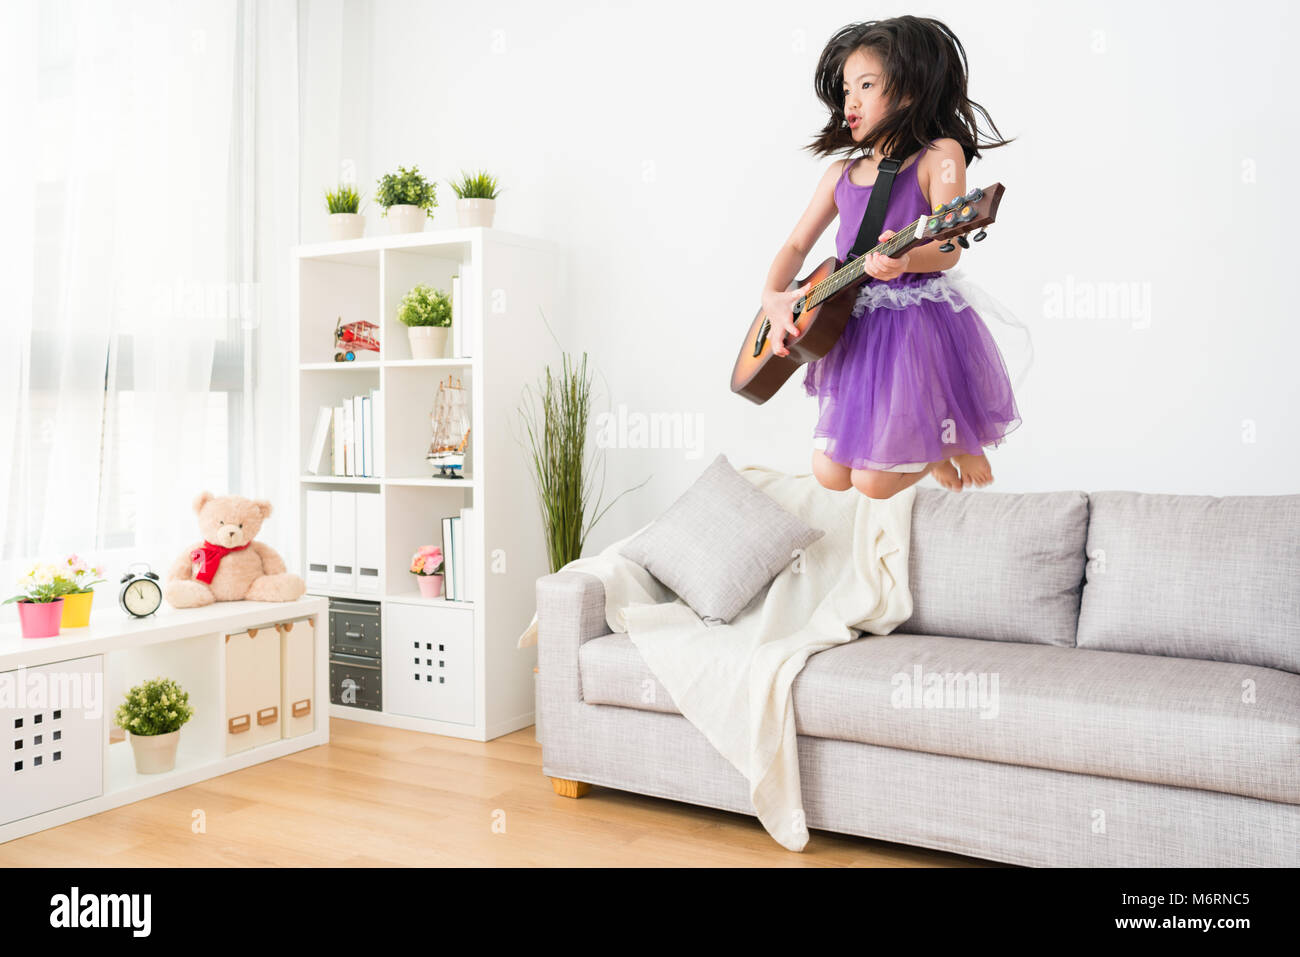 Little young girl daughter jumping crazily on the sofa with a wooden guitar. Thinking she is the real rocker. Stock Photo